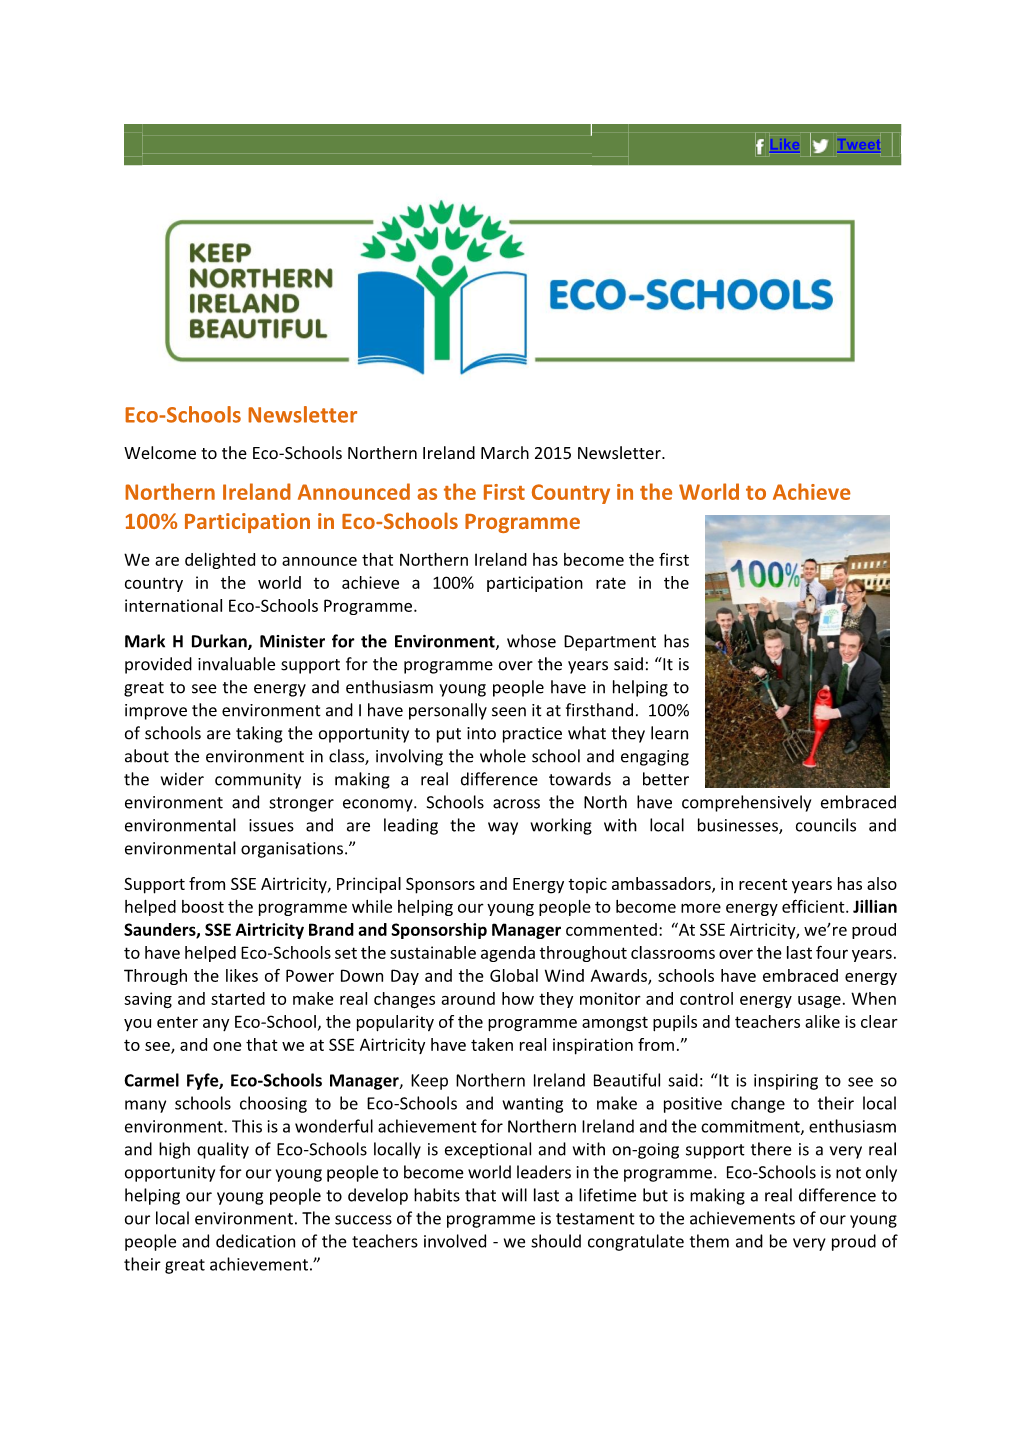 Eco-Schools Newsletter Northern Ireland Announced As the First